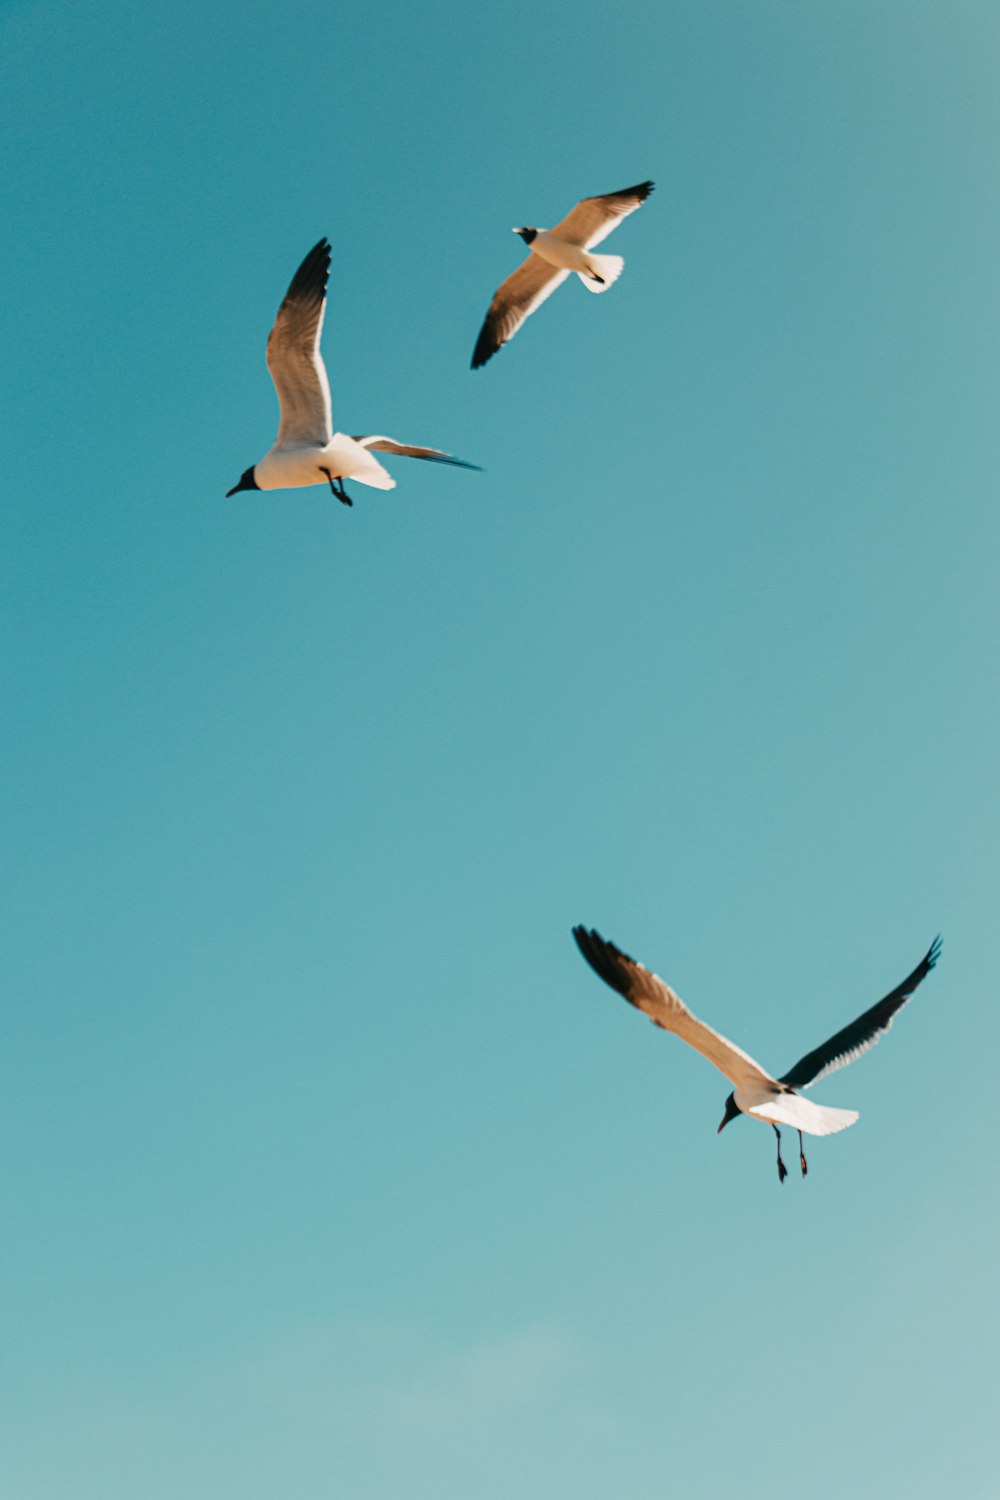 500 Bird Pictures Hd Download Free Images On Unsplash